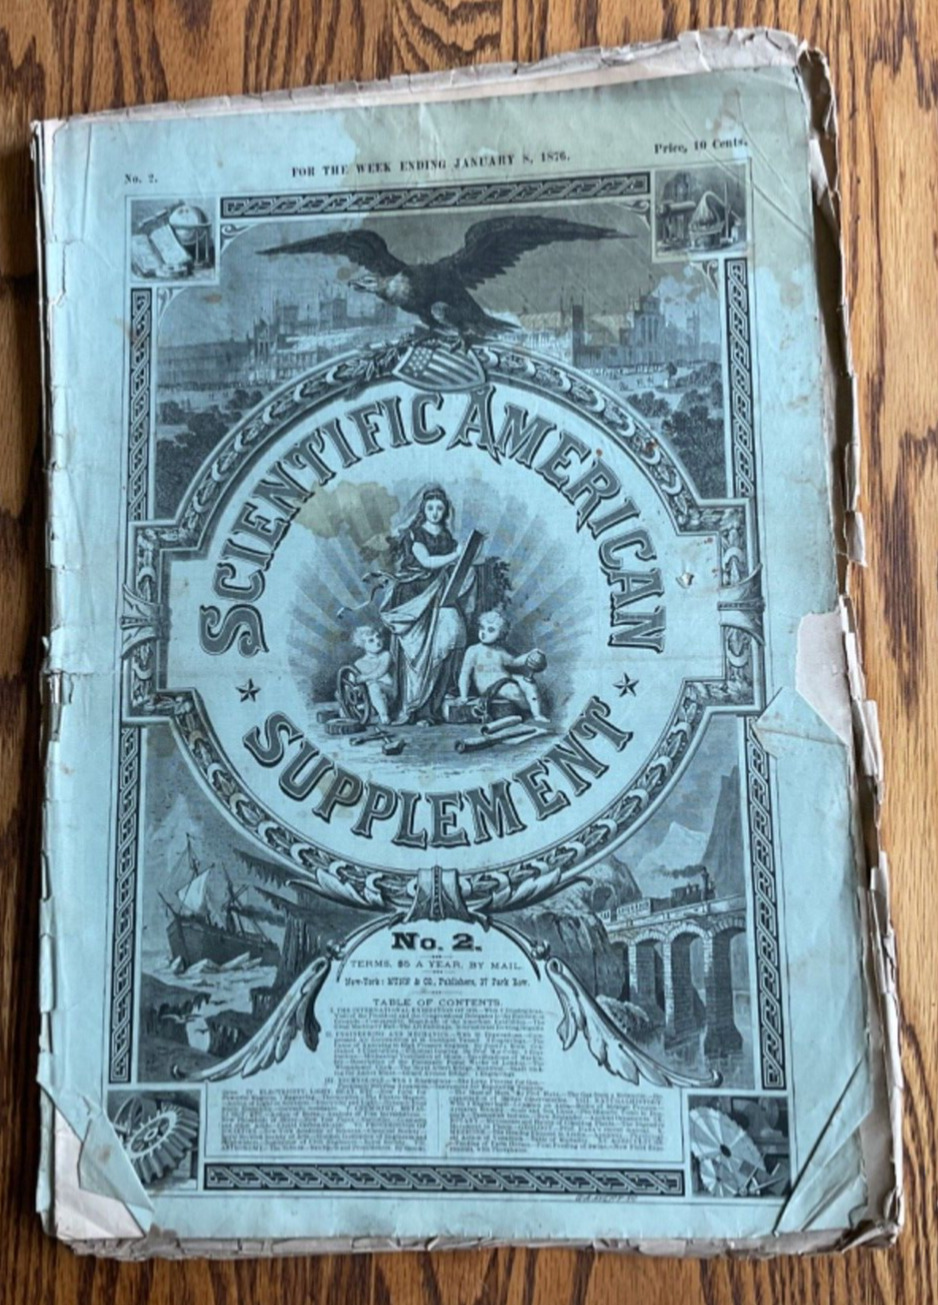 Vintage Scientific American Supplement Dated January 6th, 1876